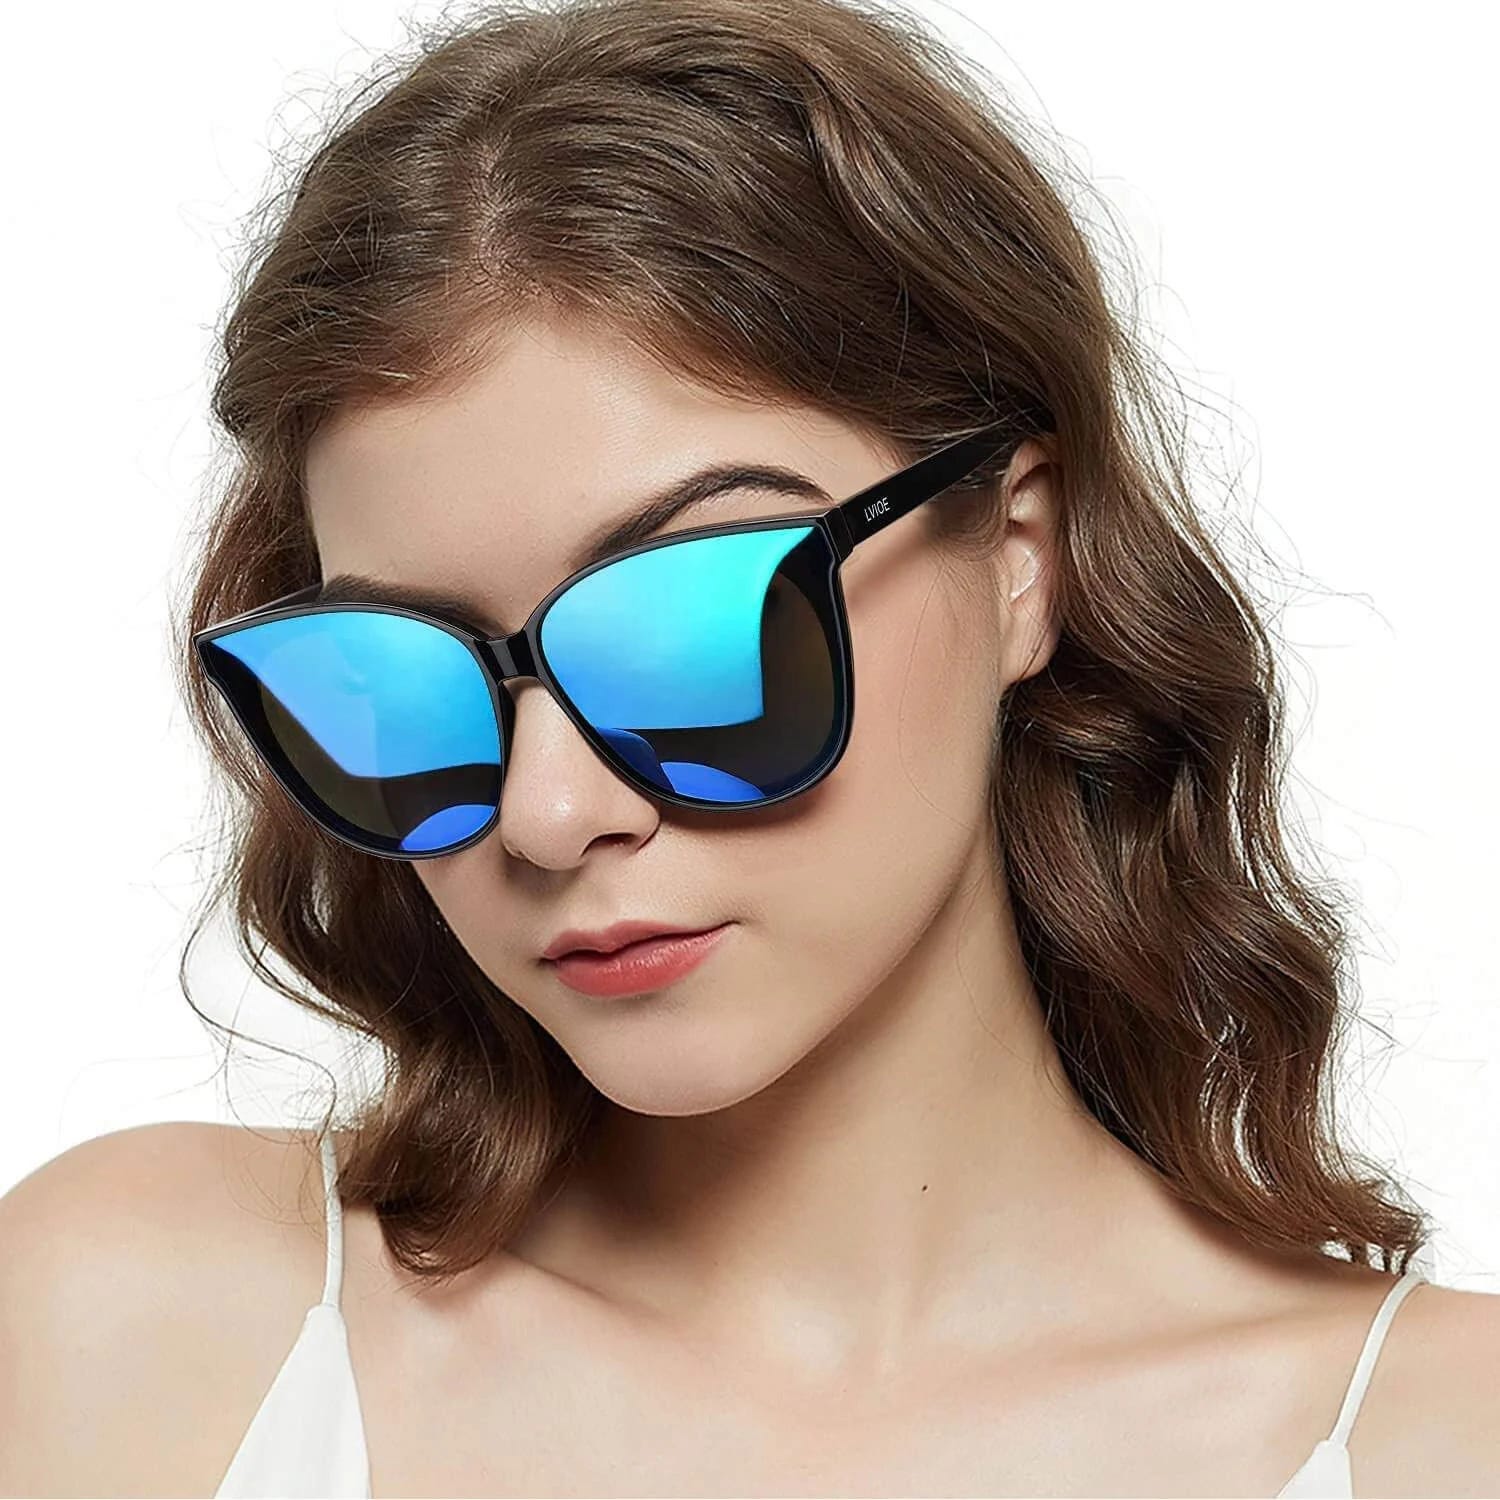 Polarized Oversized Mirrored Sunglasses for Women - Excellent UV Protection and Fashionable Design | Image